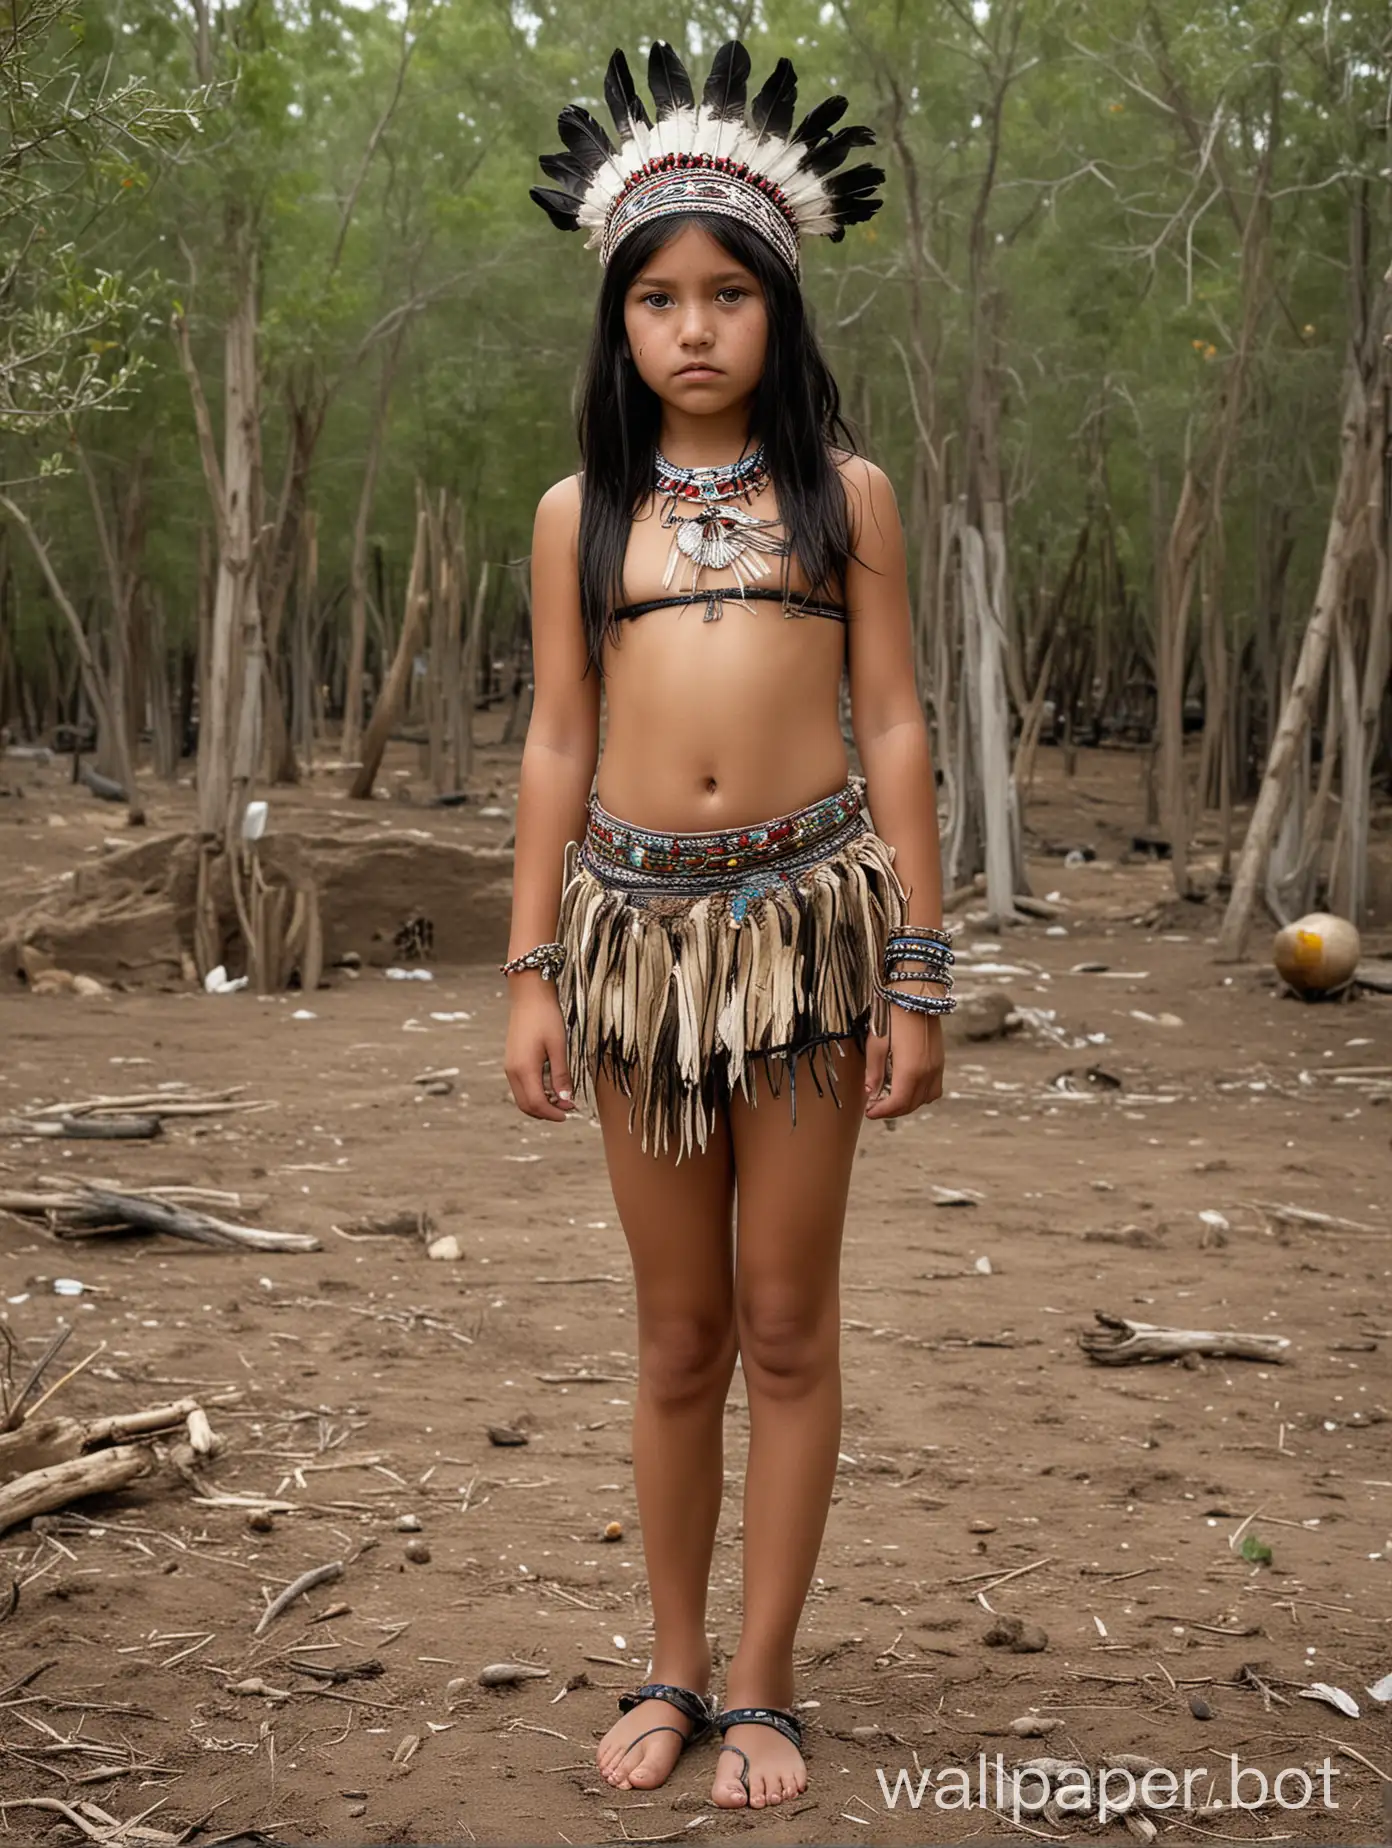 10 year old native American girl black hair black eyes wearing headdress a small mini skirt and a native bikini top with little perky breasts and standing in a native American burial ground 